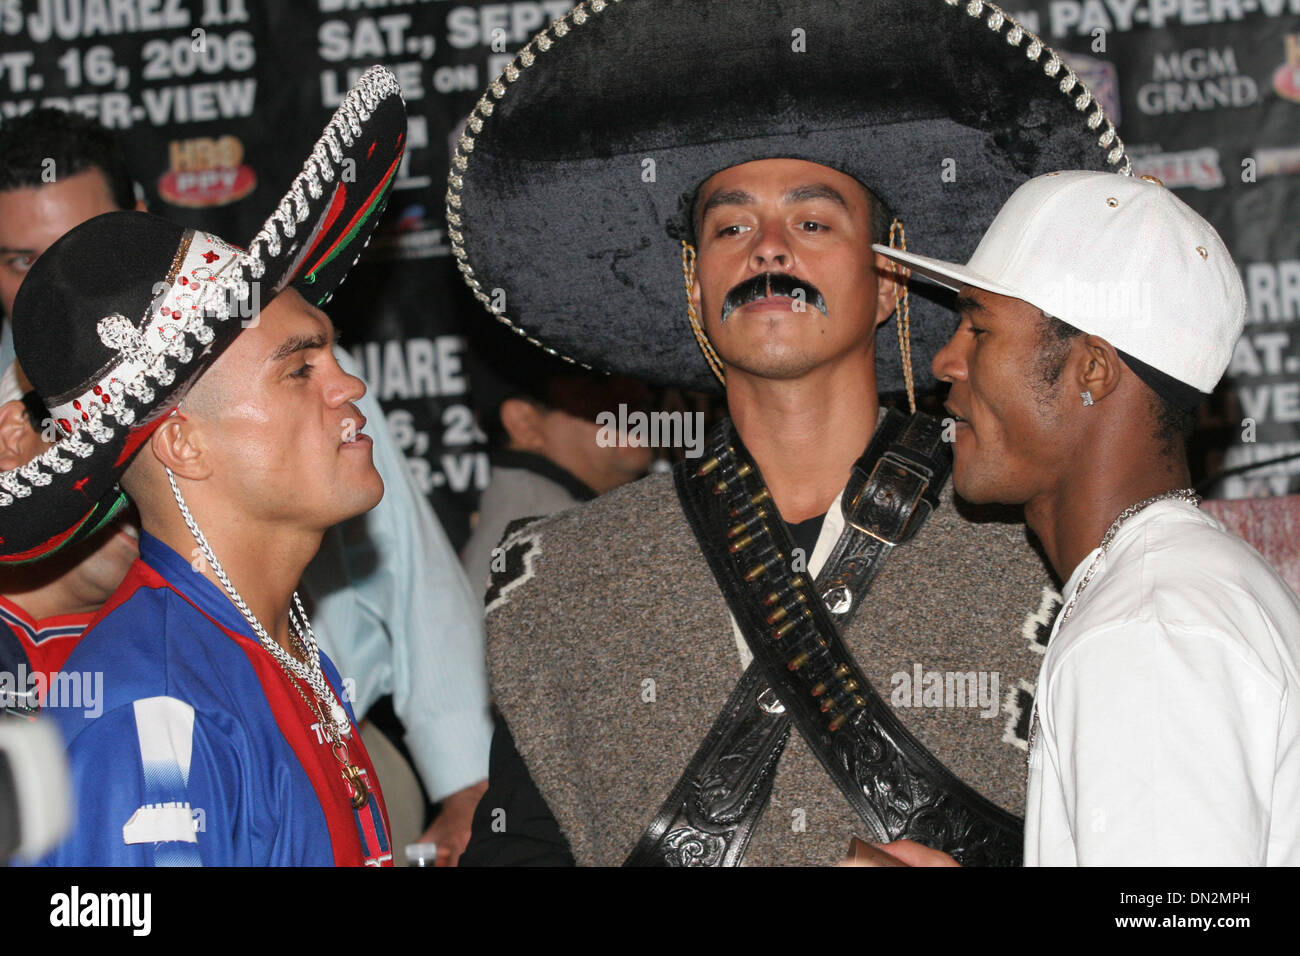 Sep 14, 2006; Las Vegas, NV, USA; BOXING: Facing off, fighters JORGE RODRIGO BARRIOS ( L) and JOAN GUZMAN (R) at the MGM Grand Hotel and Casino at at the Barrera vs Juarez ll press conference. Barrios will be defending his WBO Jr Lightweight Title against & GUZMAN. The fight will be on Saturday 09-16-06 at the MGM Grand Garden Arena and will be televised on Pay Per View. Mandatory  Stock Photo